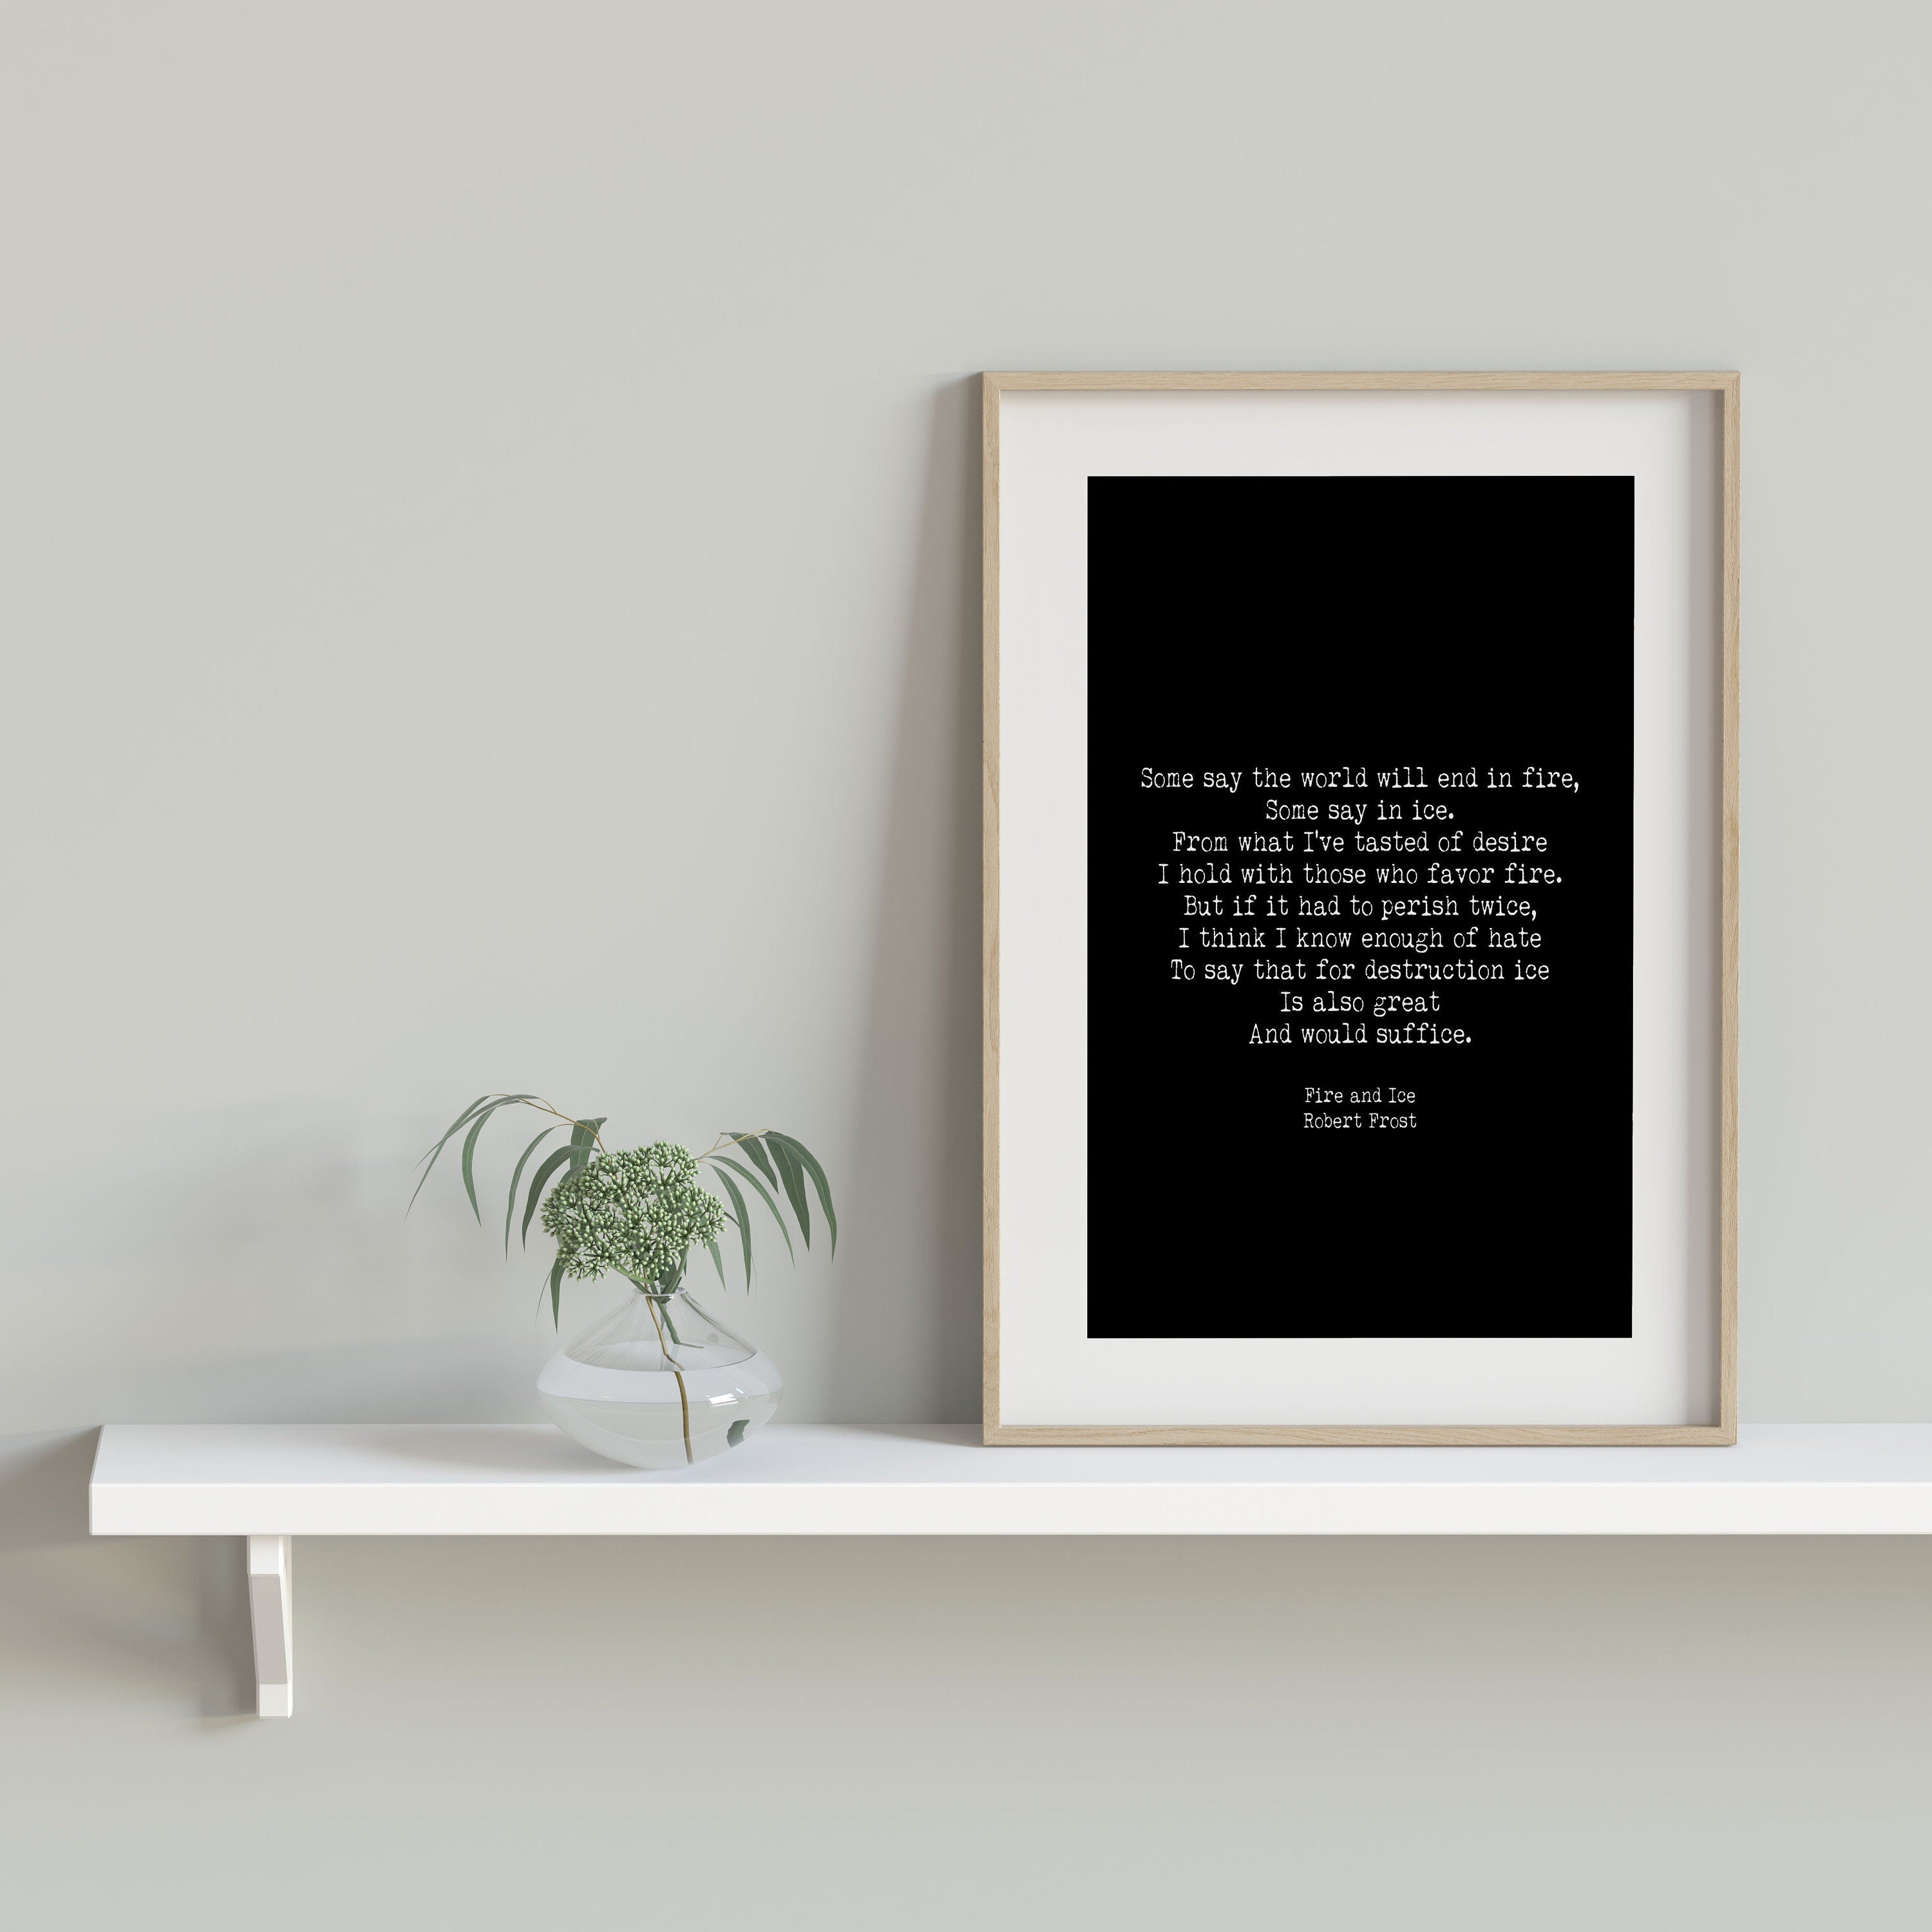 Fire and Ice Robert Frost Wall Art Print in Black & White for Living Room Wall Art, Unframed